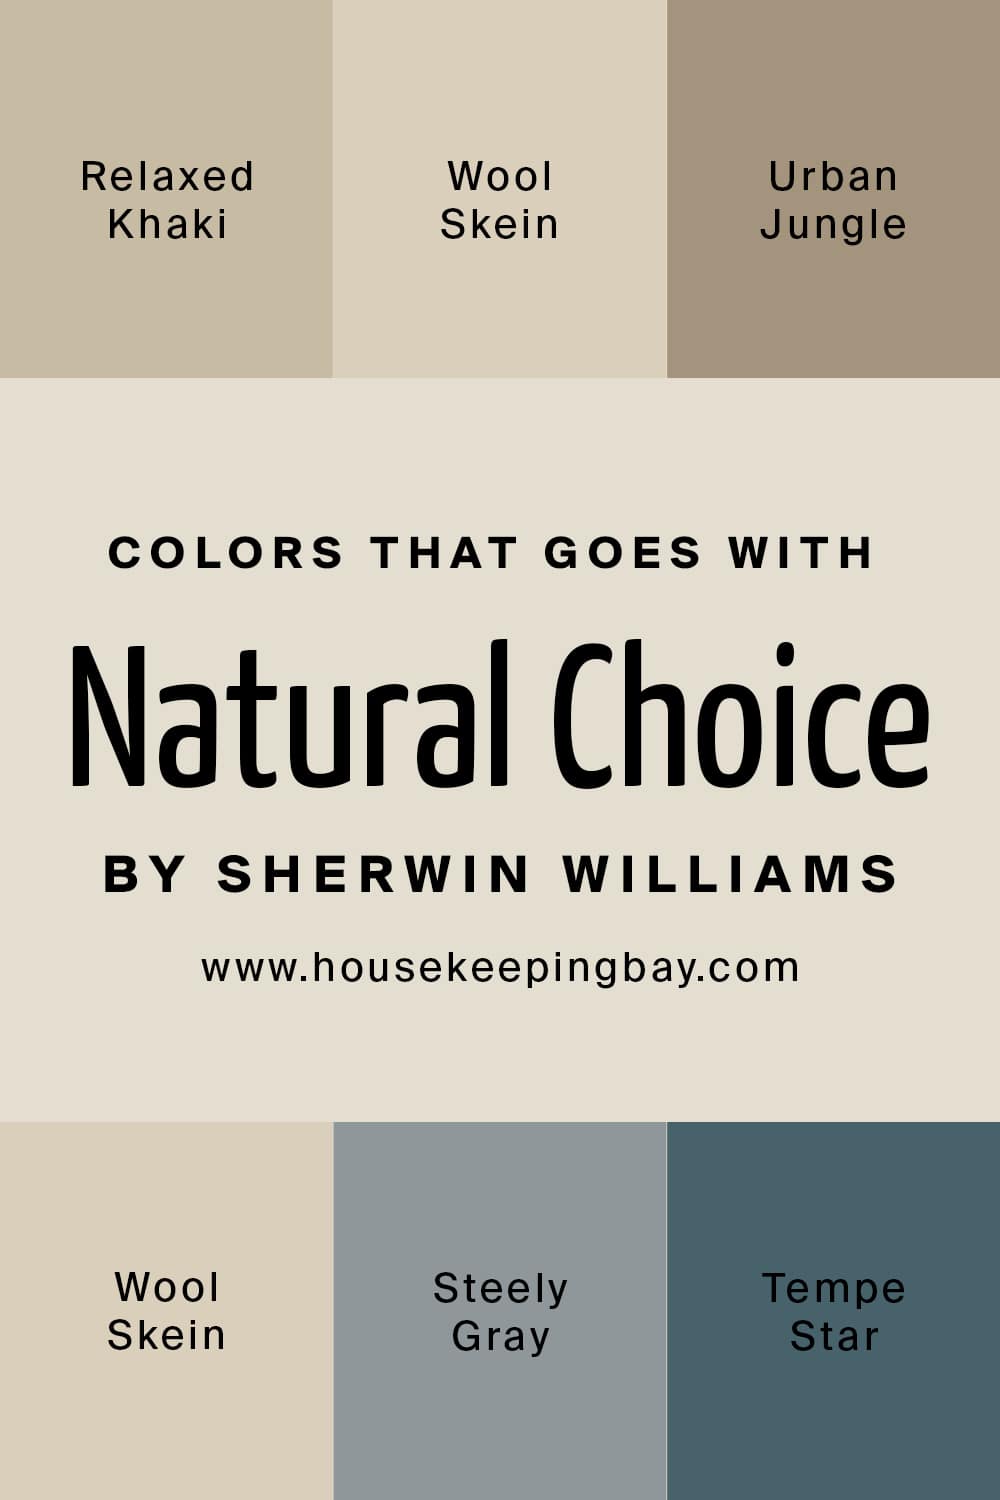 Colors that goes with Natural Choice by Sherwin Williams